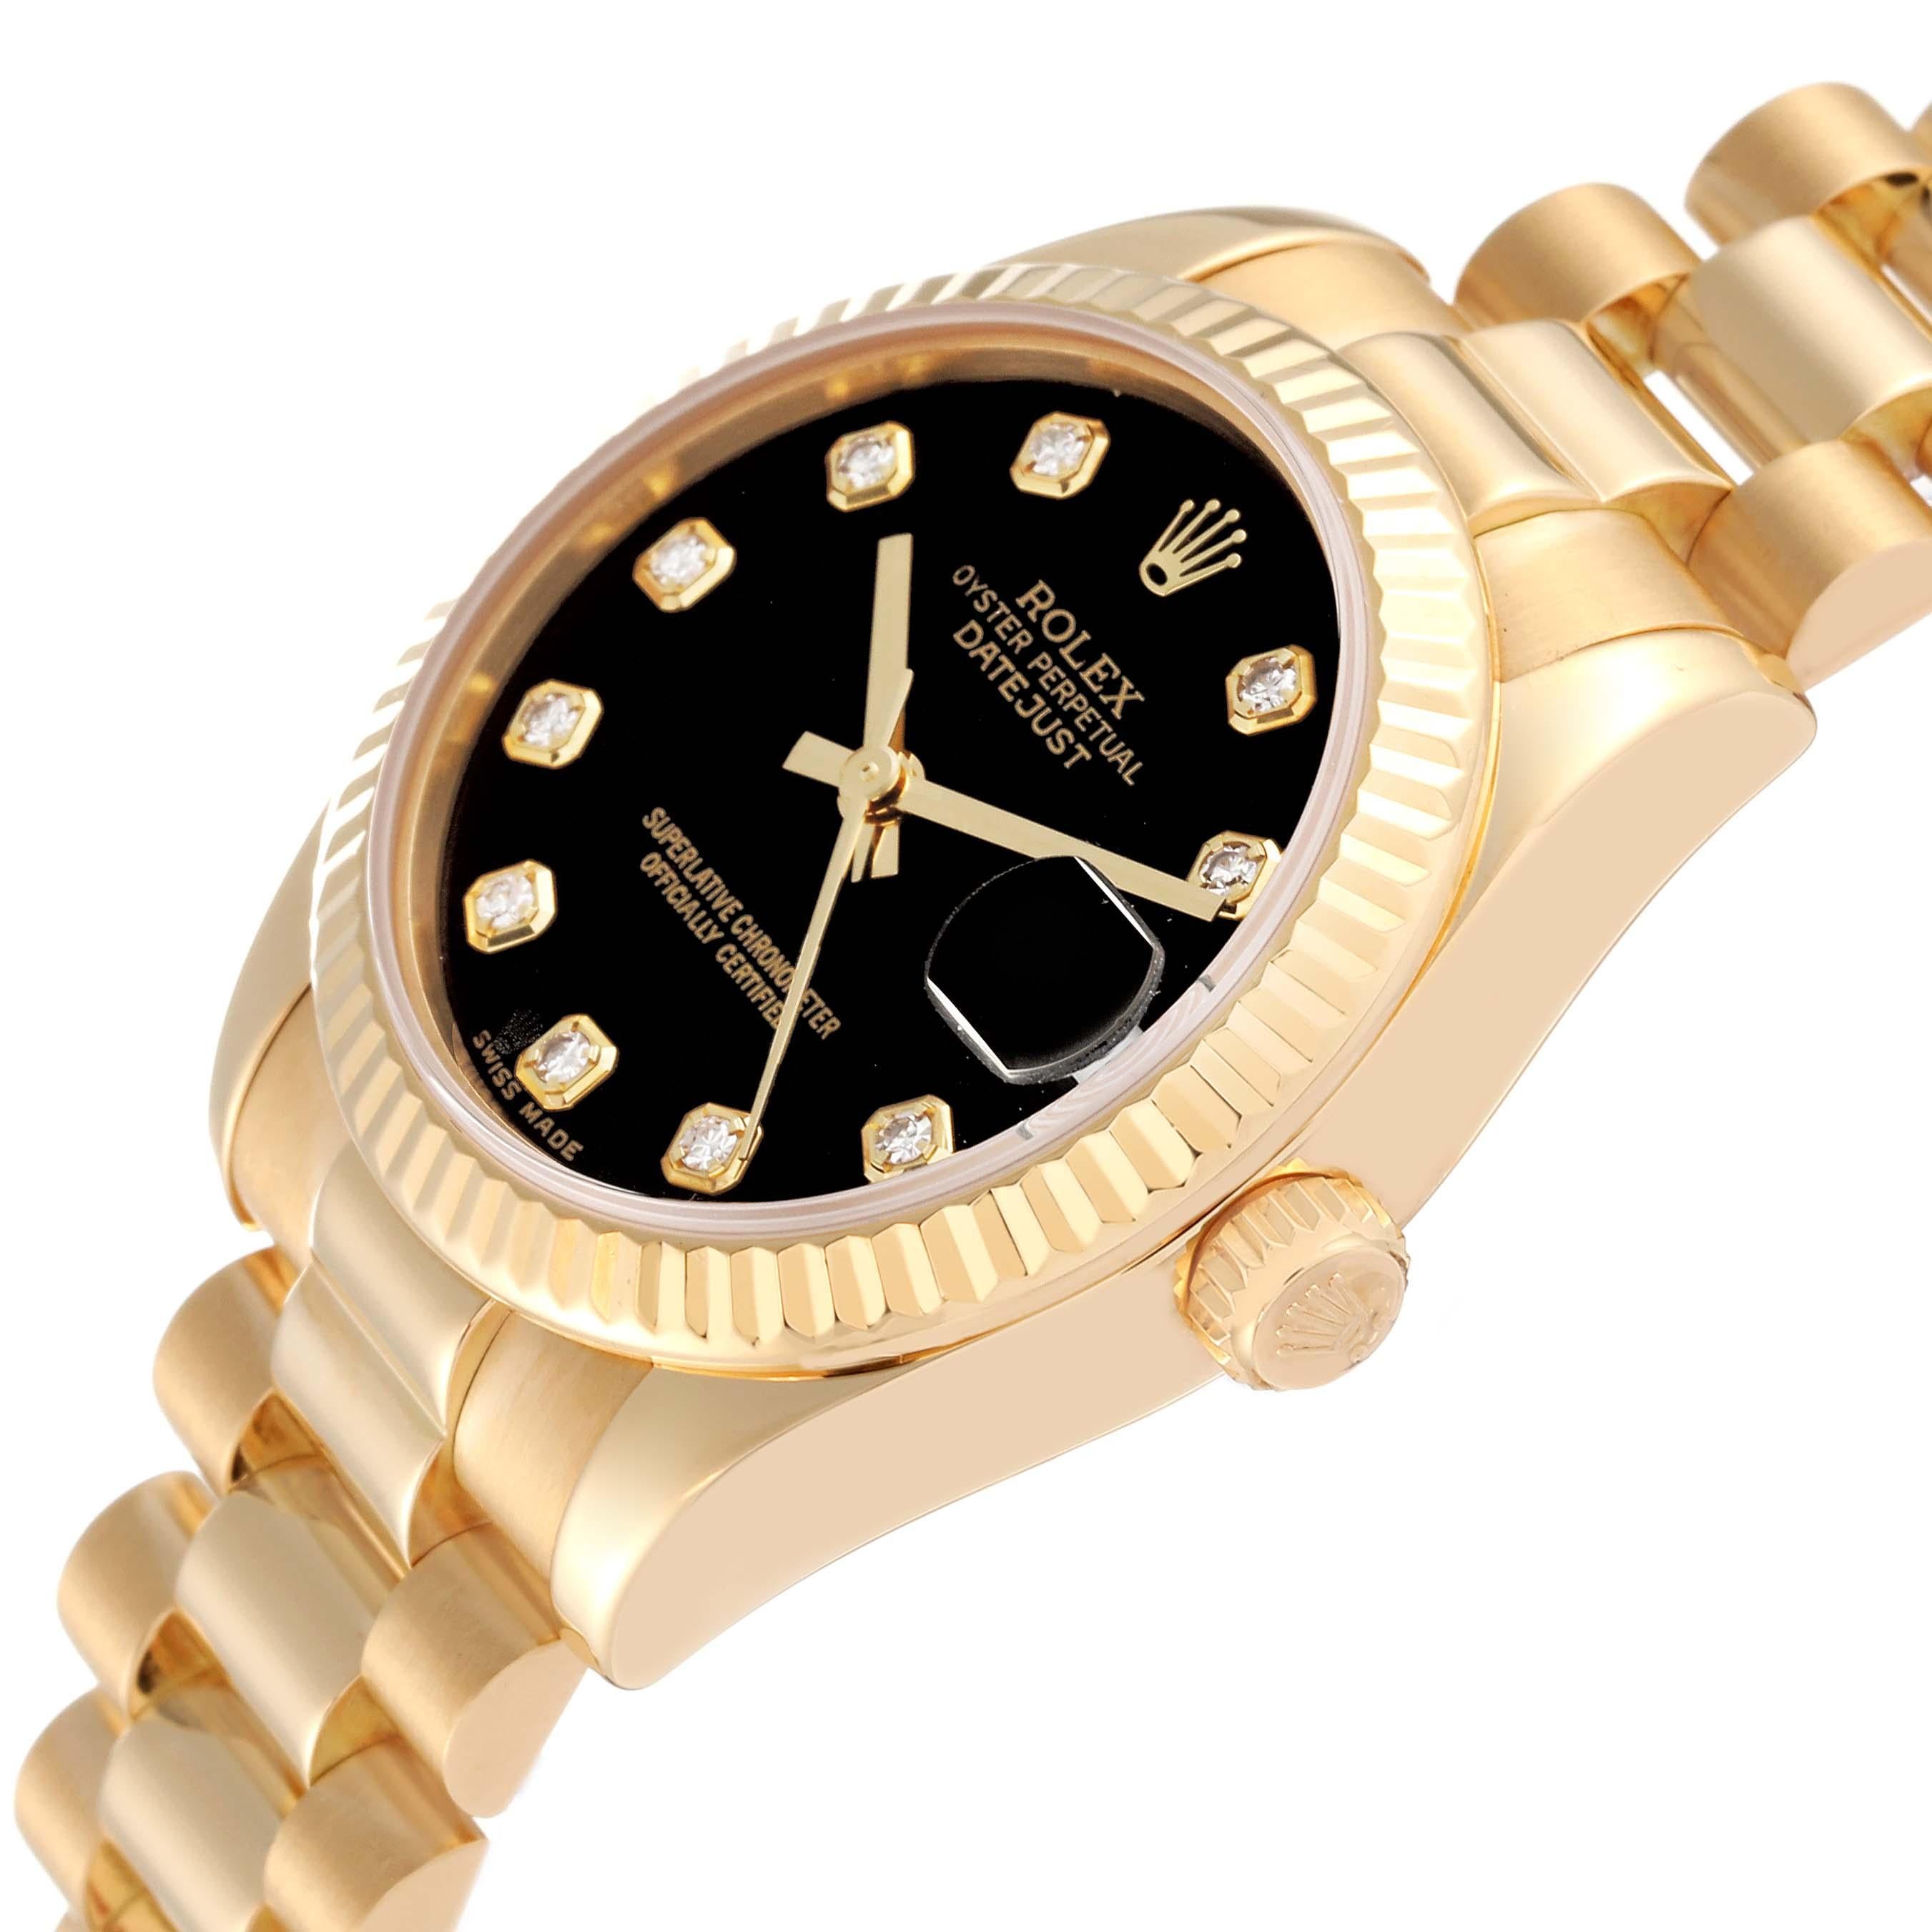 Rolex Datejust President Midsize Yellow Gold Diamond Dial Ladies Watch 178278 For Sale 1